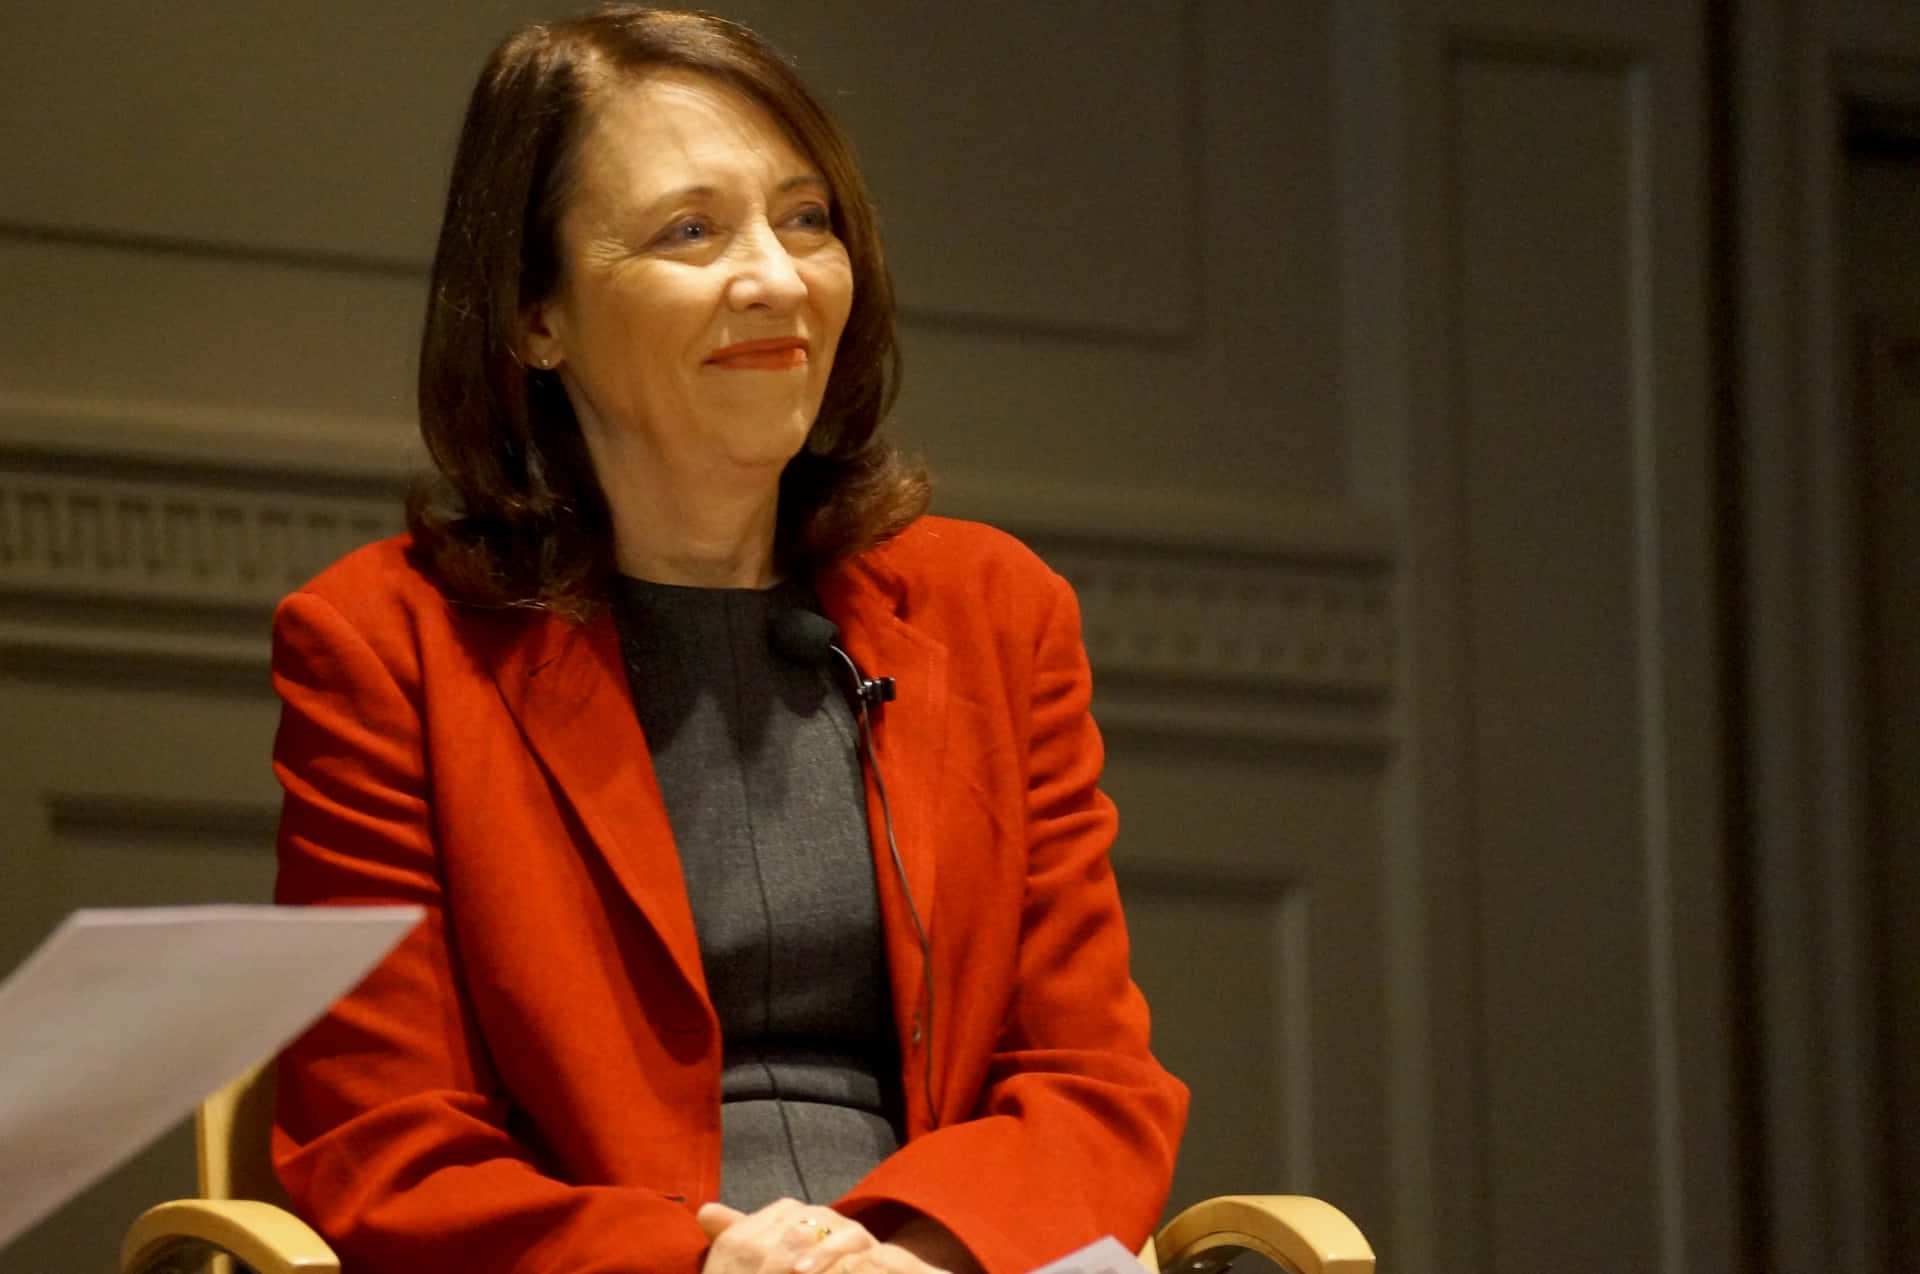 Maria Cantwell Smiling Politely Wallpaper